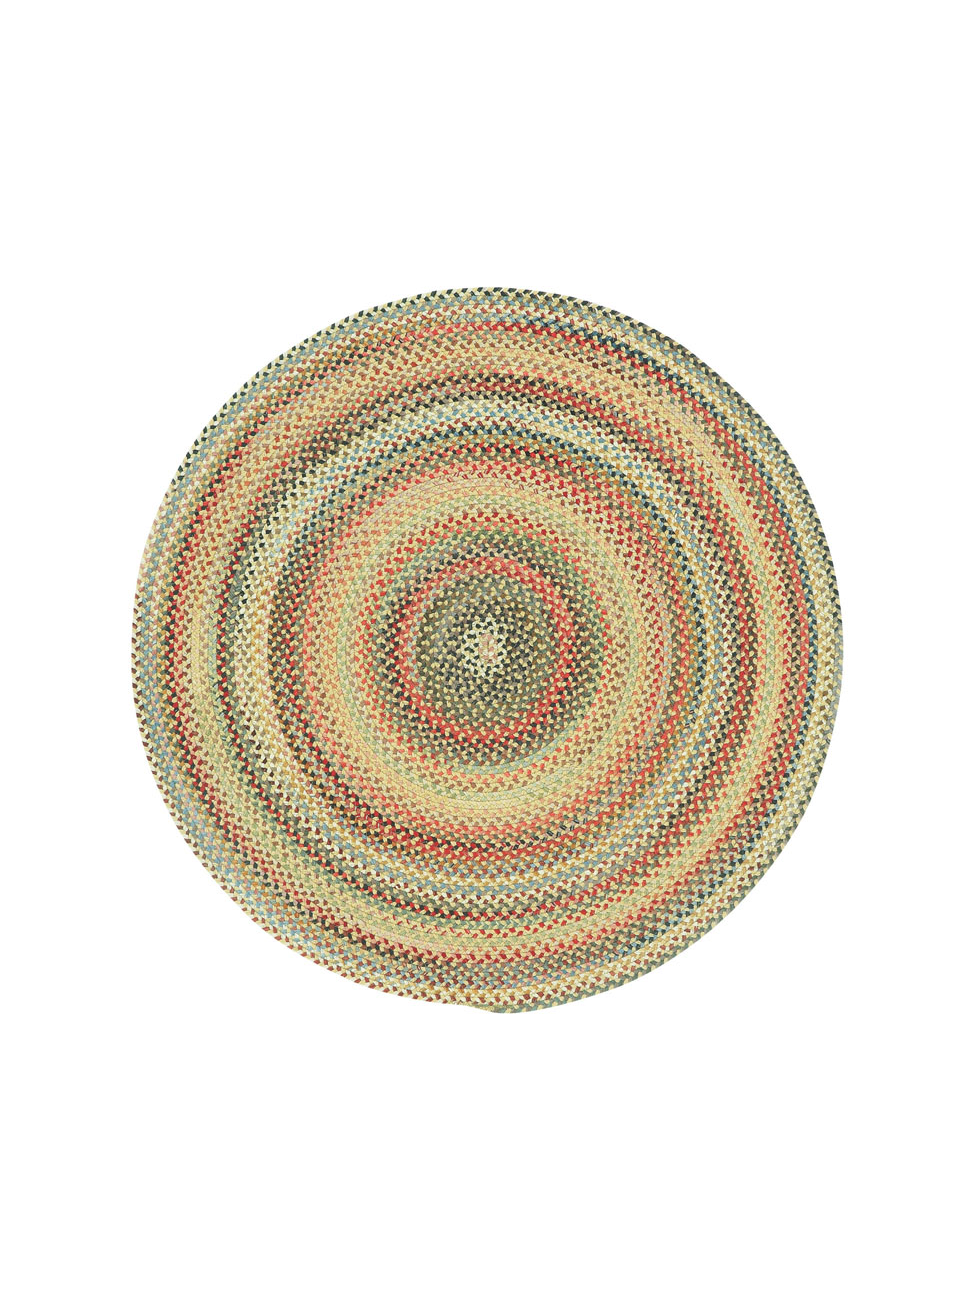 Pictures of Countryside Braided Wool Rugs, Gold Portland Braided Rug, Round round braided rugs